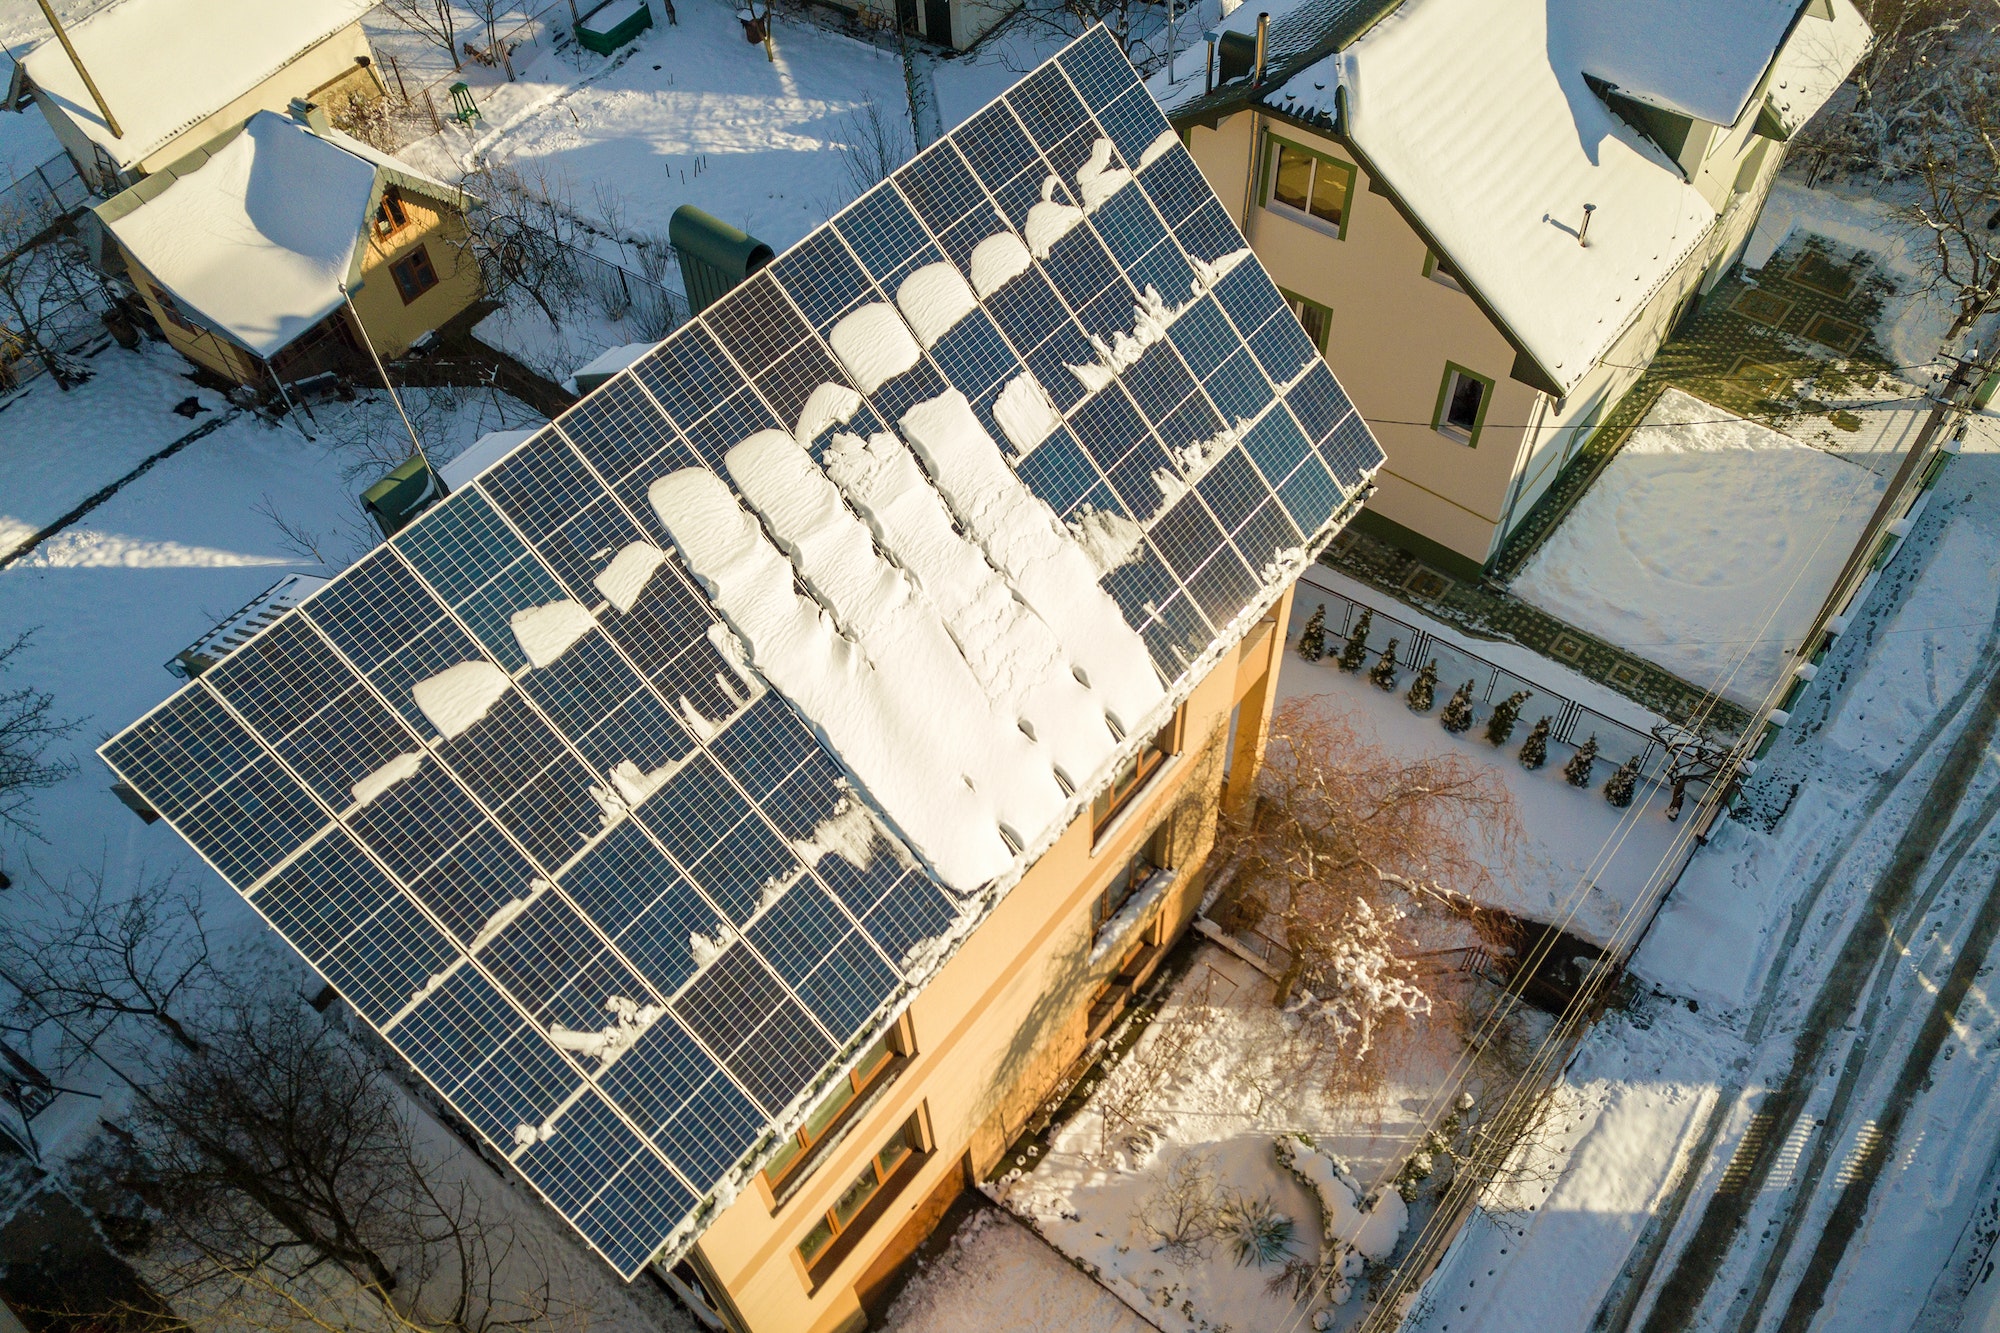 House roof covered with solar panels in winter with snow on top. Energy efficiency and maintenance